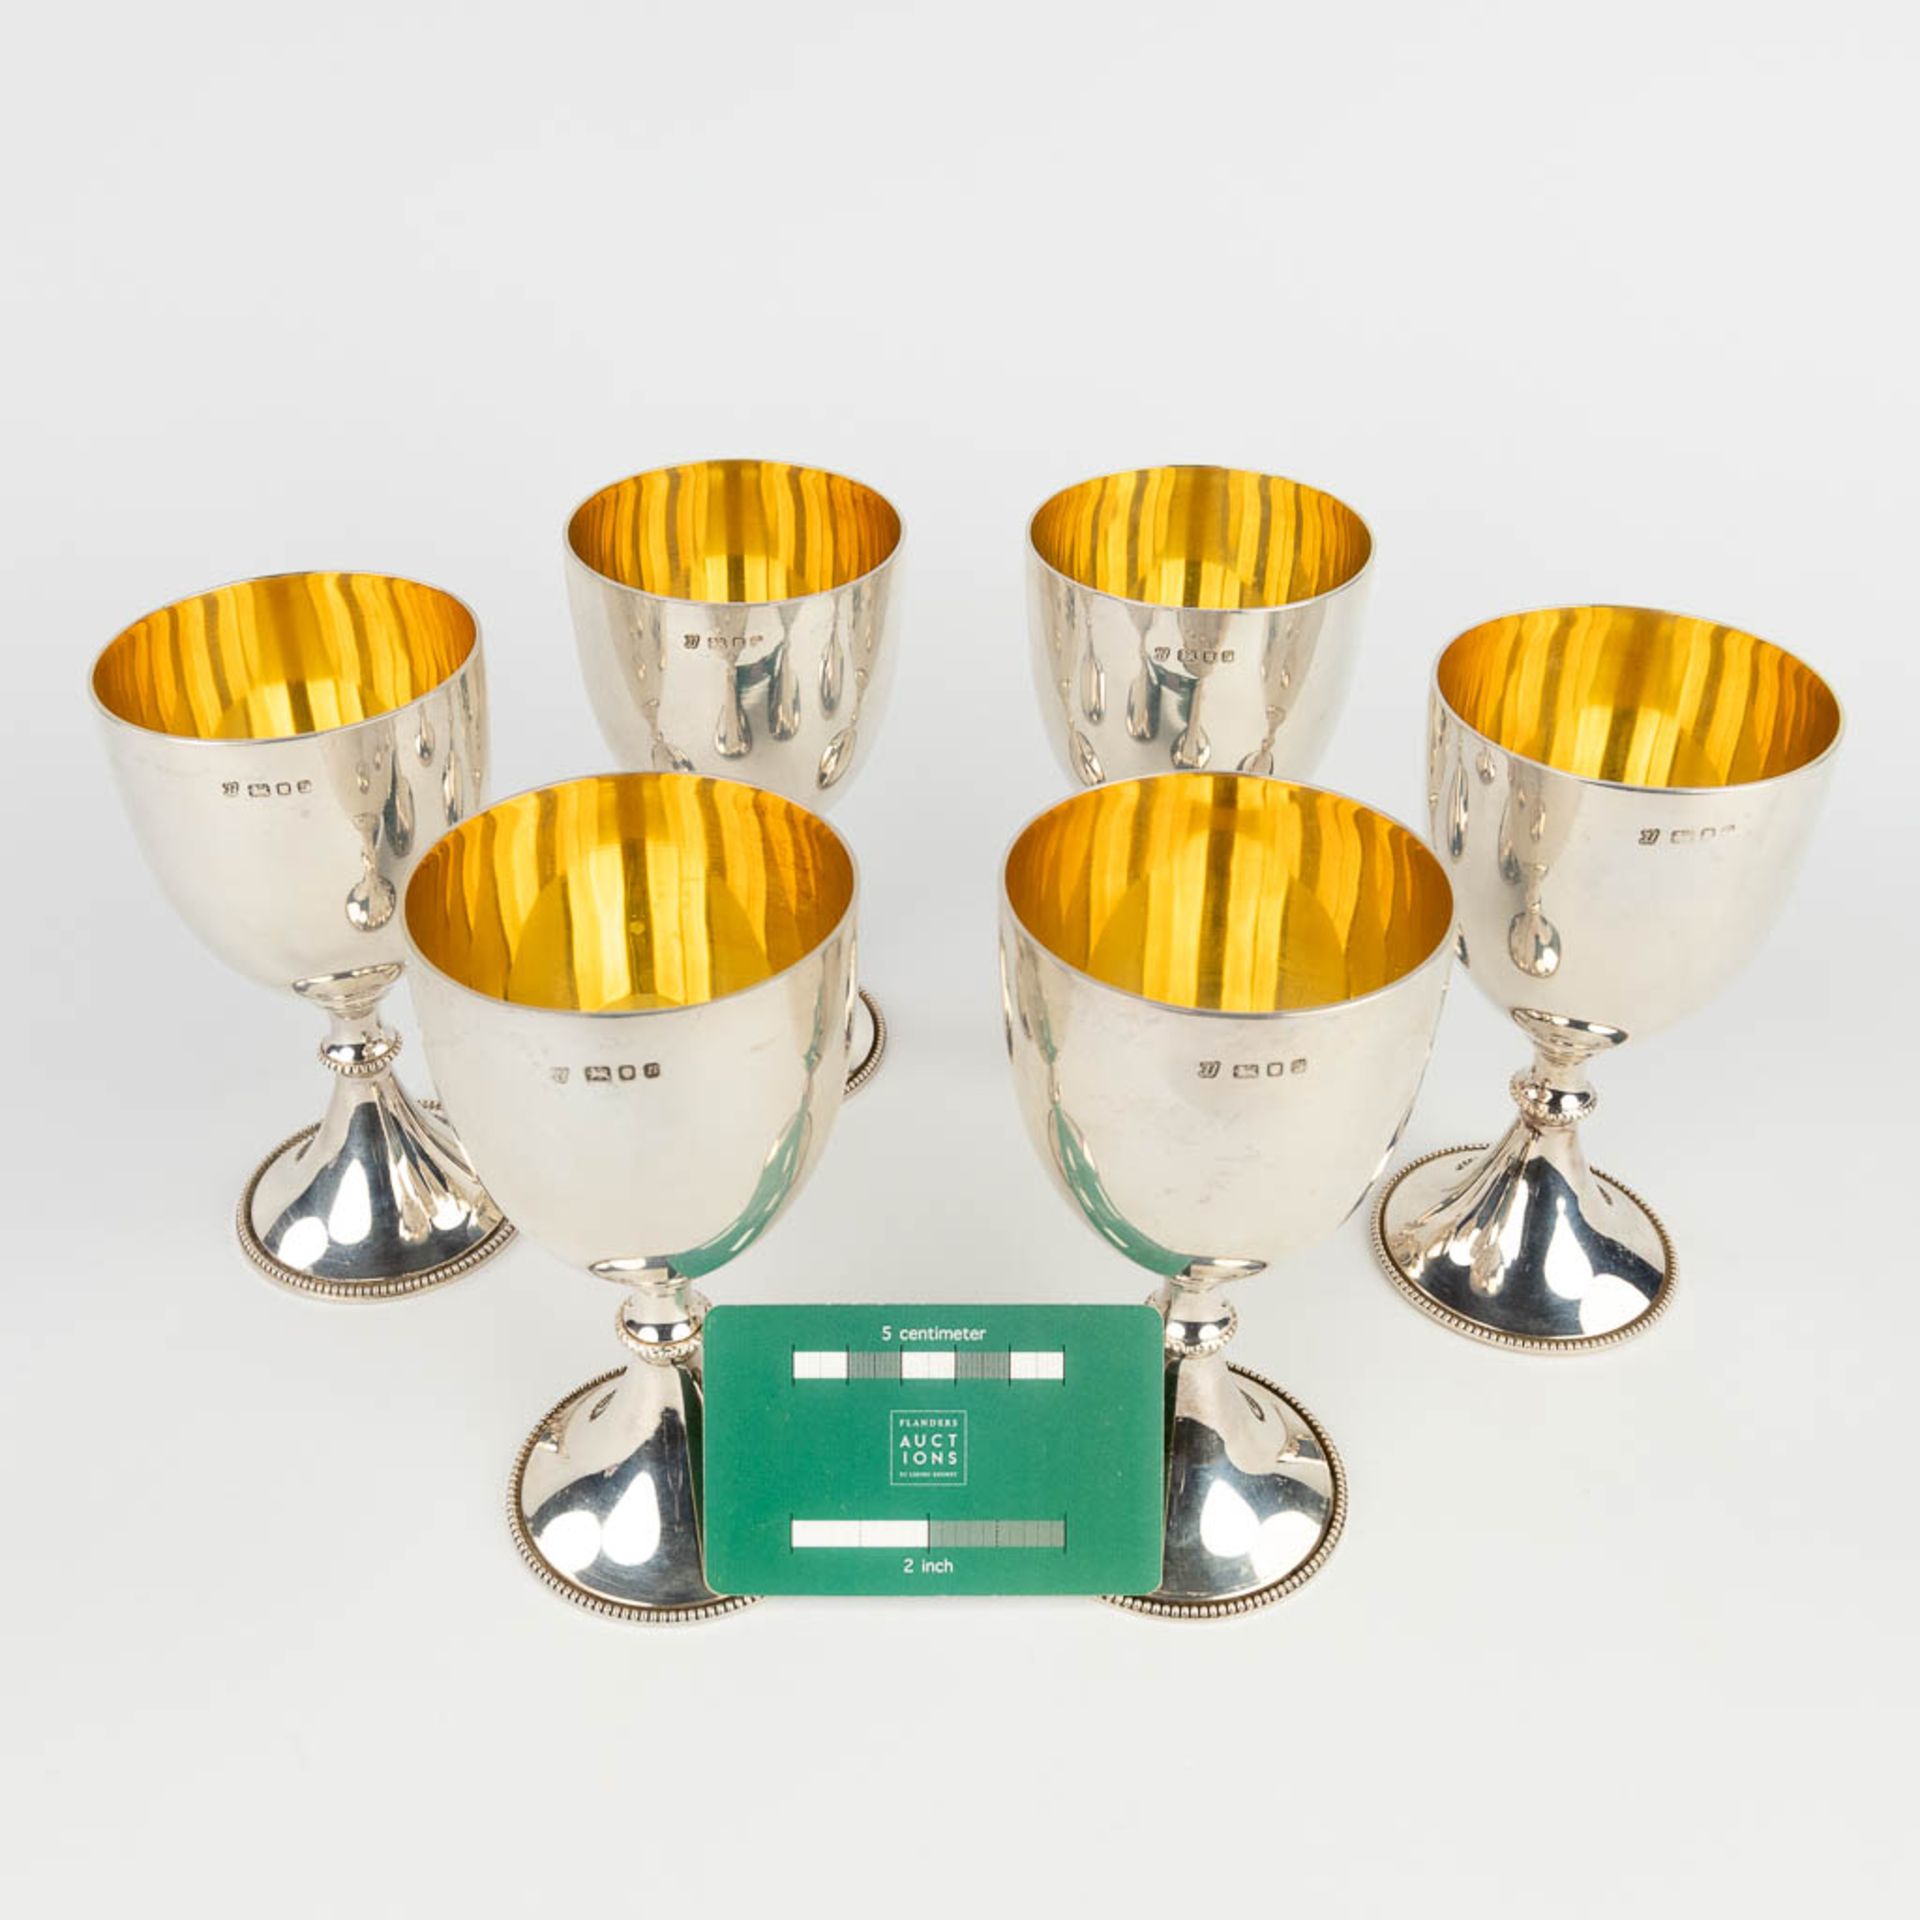 A set of 6 silver goblets, made by Trevor Towner in England, 1972. 1097g. (H: 14,5 x D: 7,5 cm) - Bild 2 aus 7